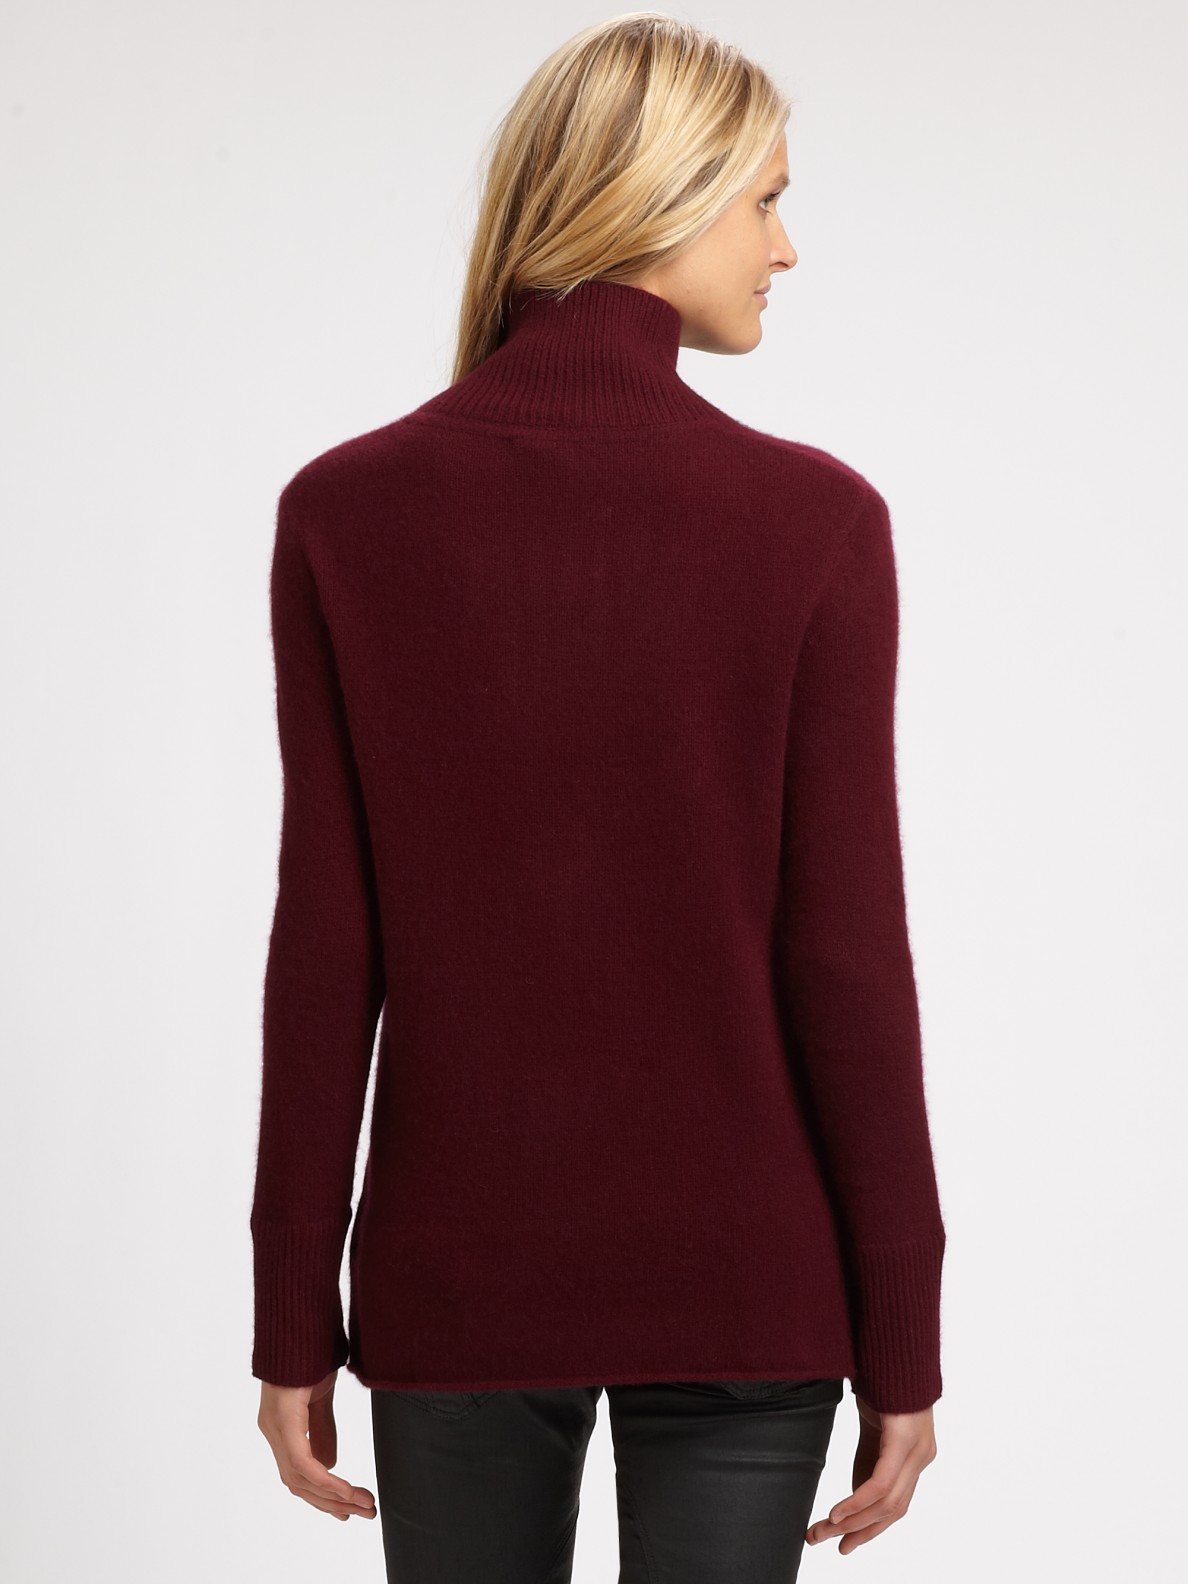 Burberry Brit Cashmere Sweater in Burgundy Red  Lyst